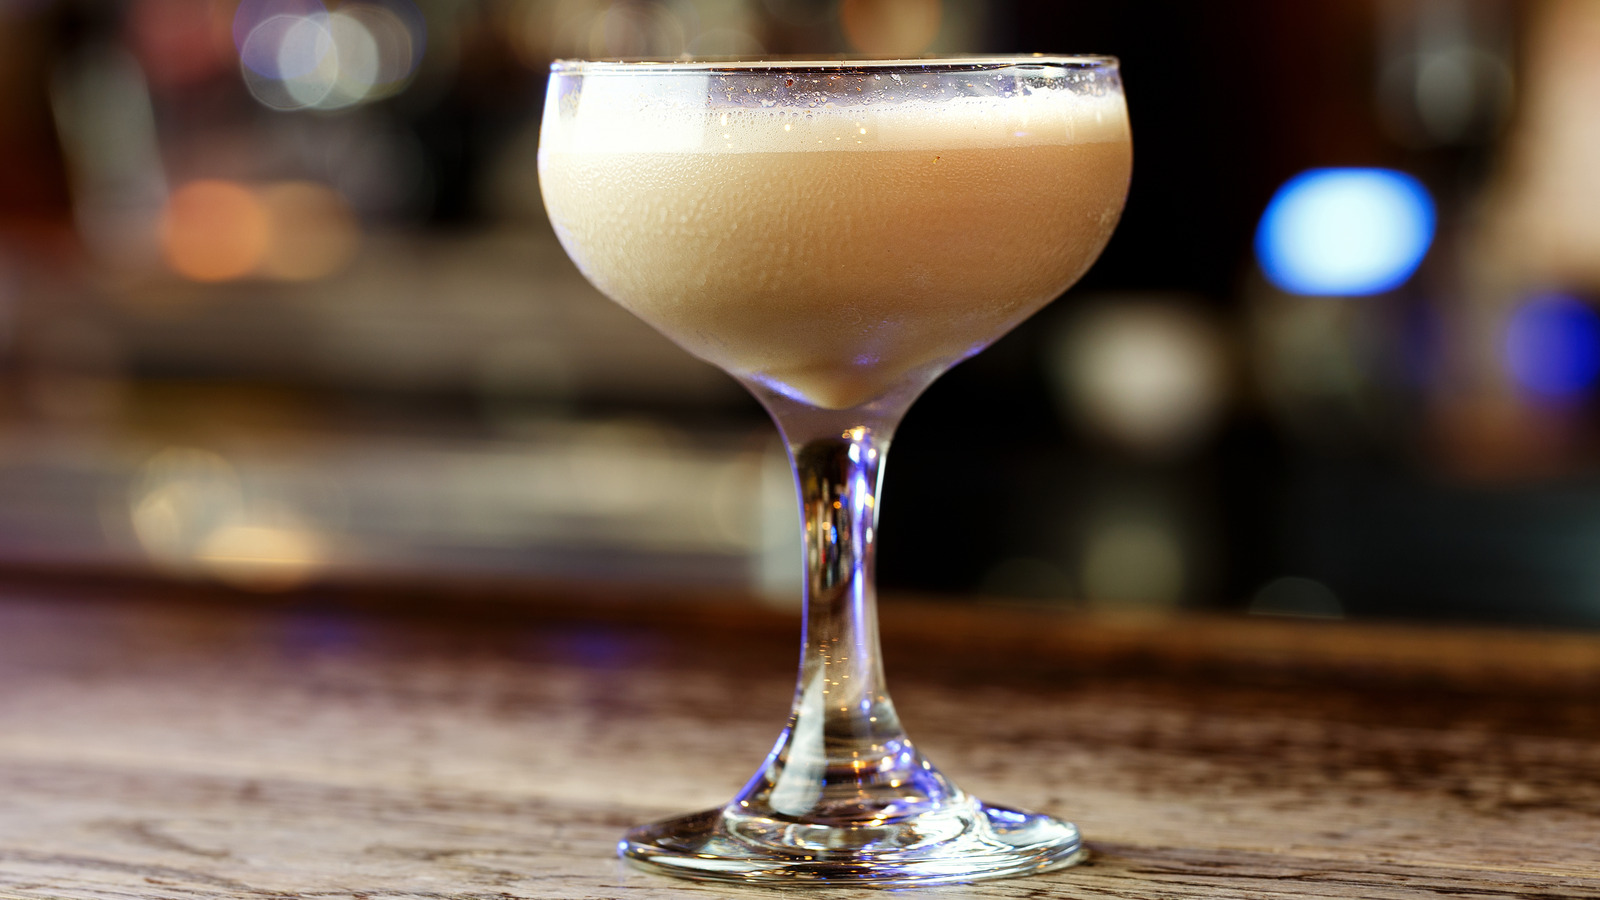 Porto Flip: A Textured Cocktail That Requires An Entire Egg